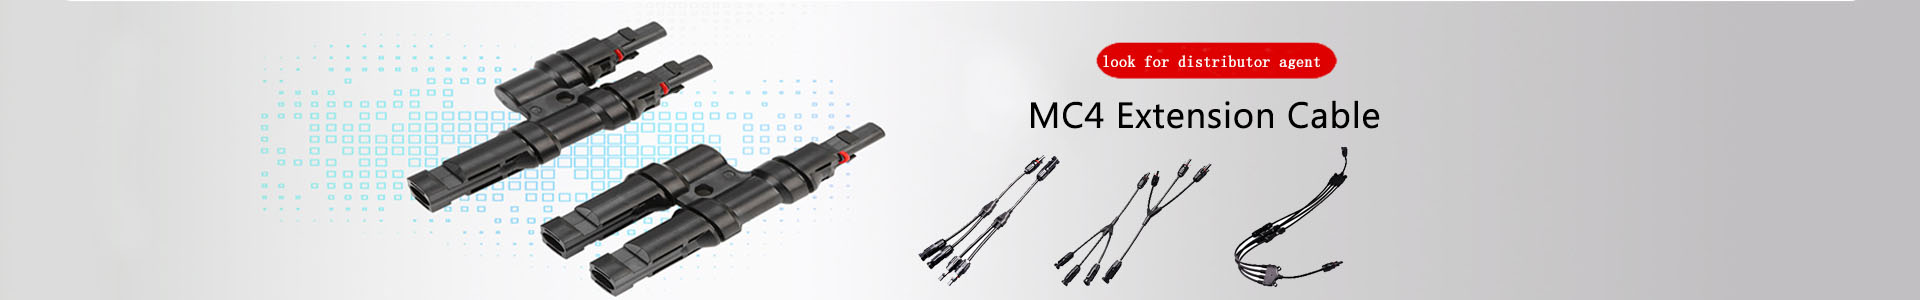 What is MC4 PV connector-Company news-Solar | solar connector,solar branch connector,diode fuse connector,MC4 extnsion cable,H1Z2Z2 solar cable, UL4703 solar cable | Leading manufacturer and supplier of solar pv cables and connectors